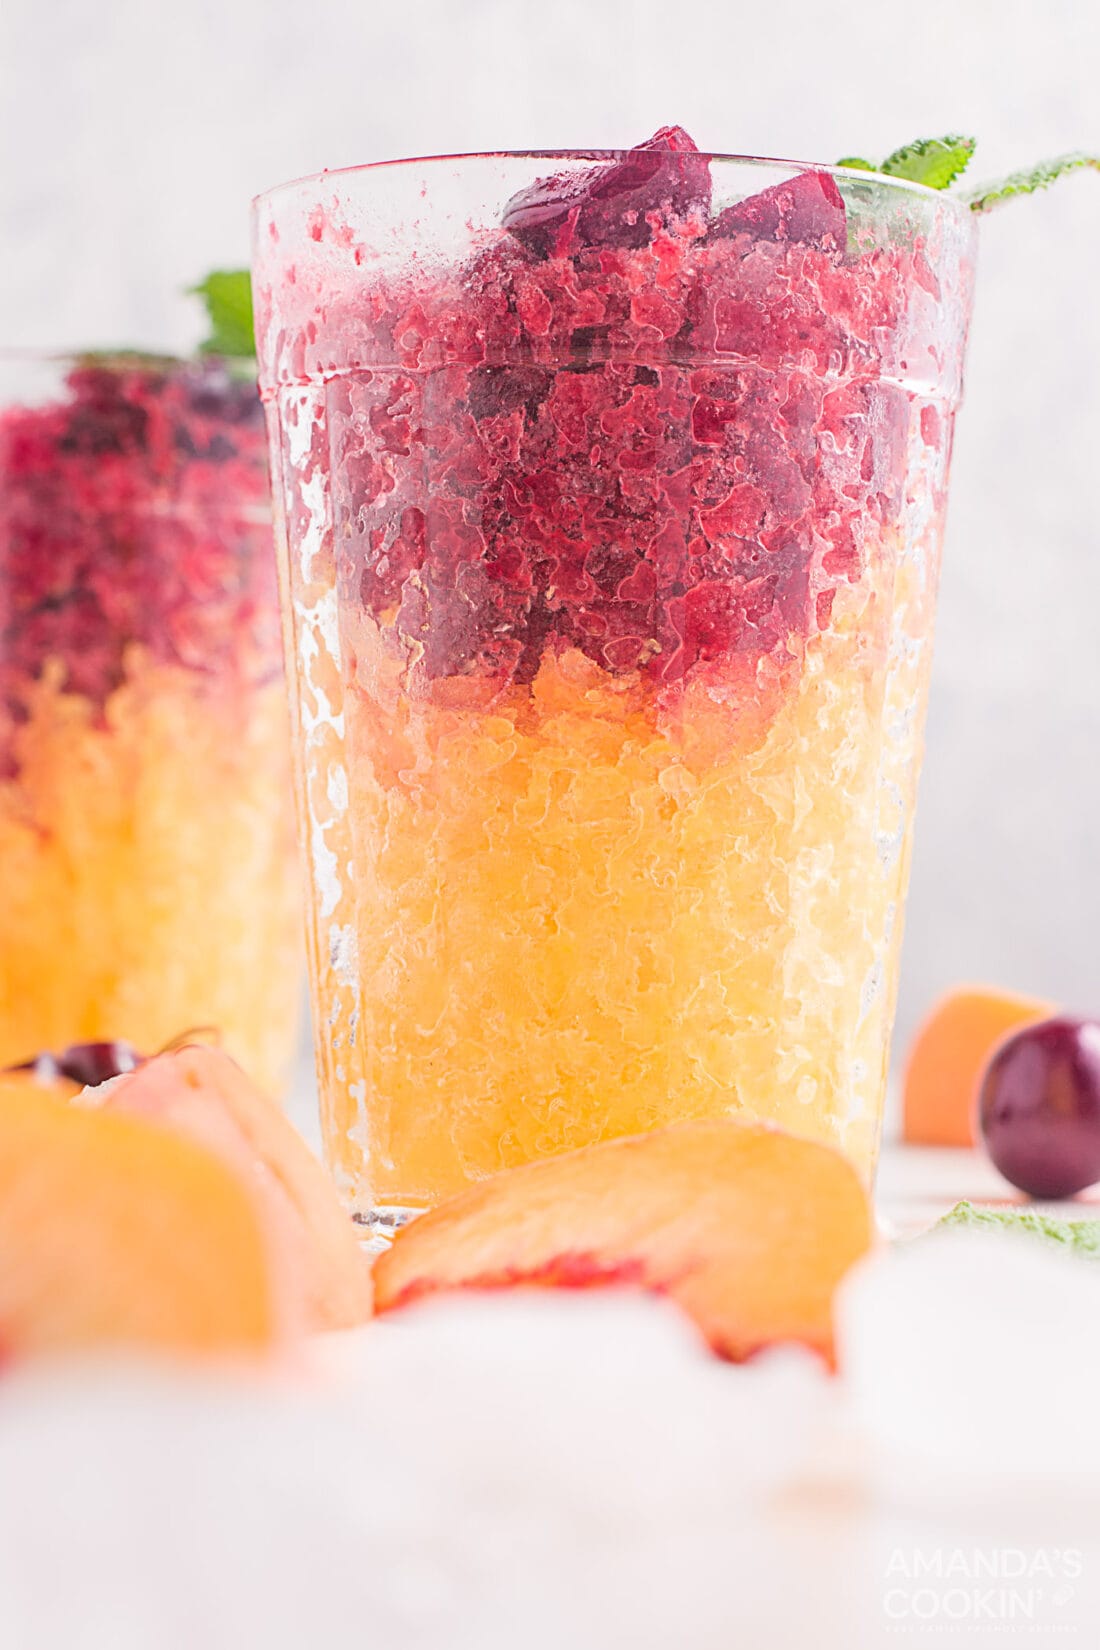 cherry and peach slushies layered in drinking glasses